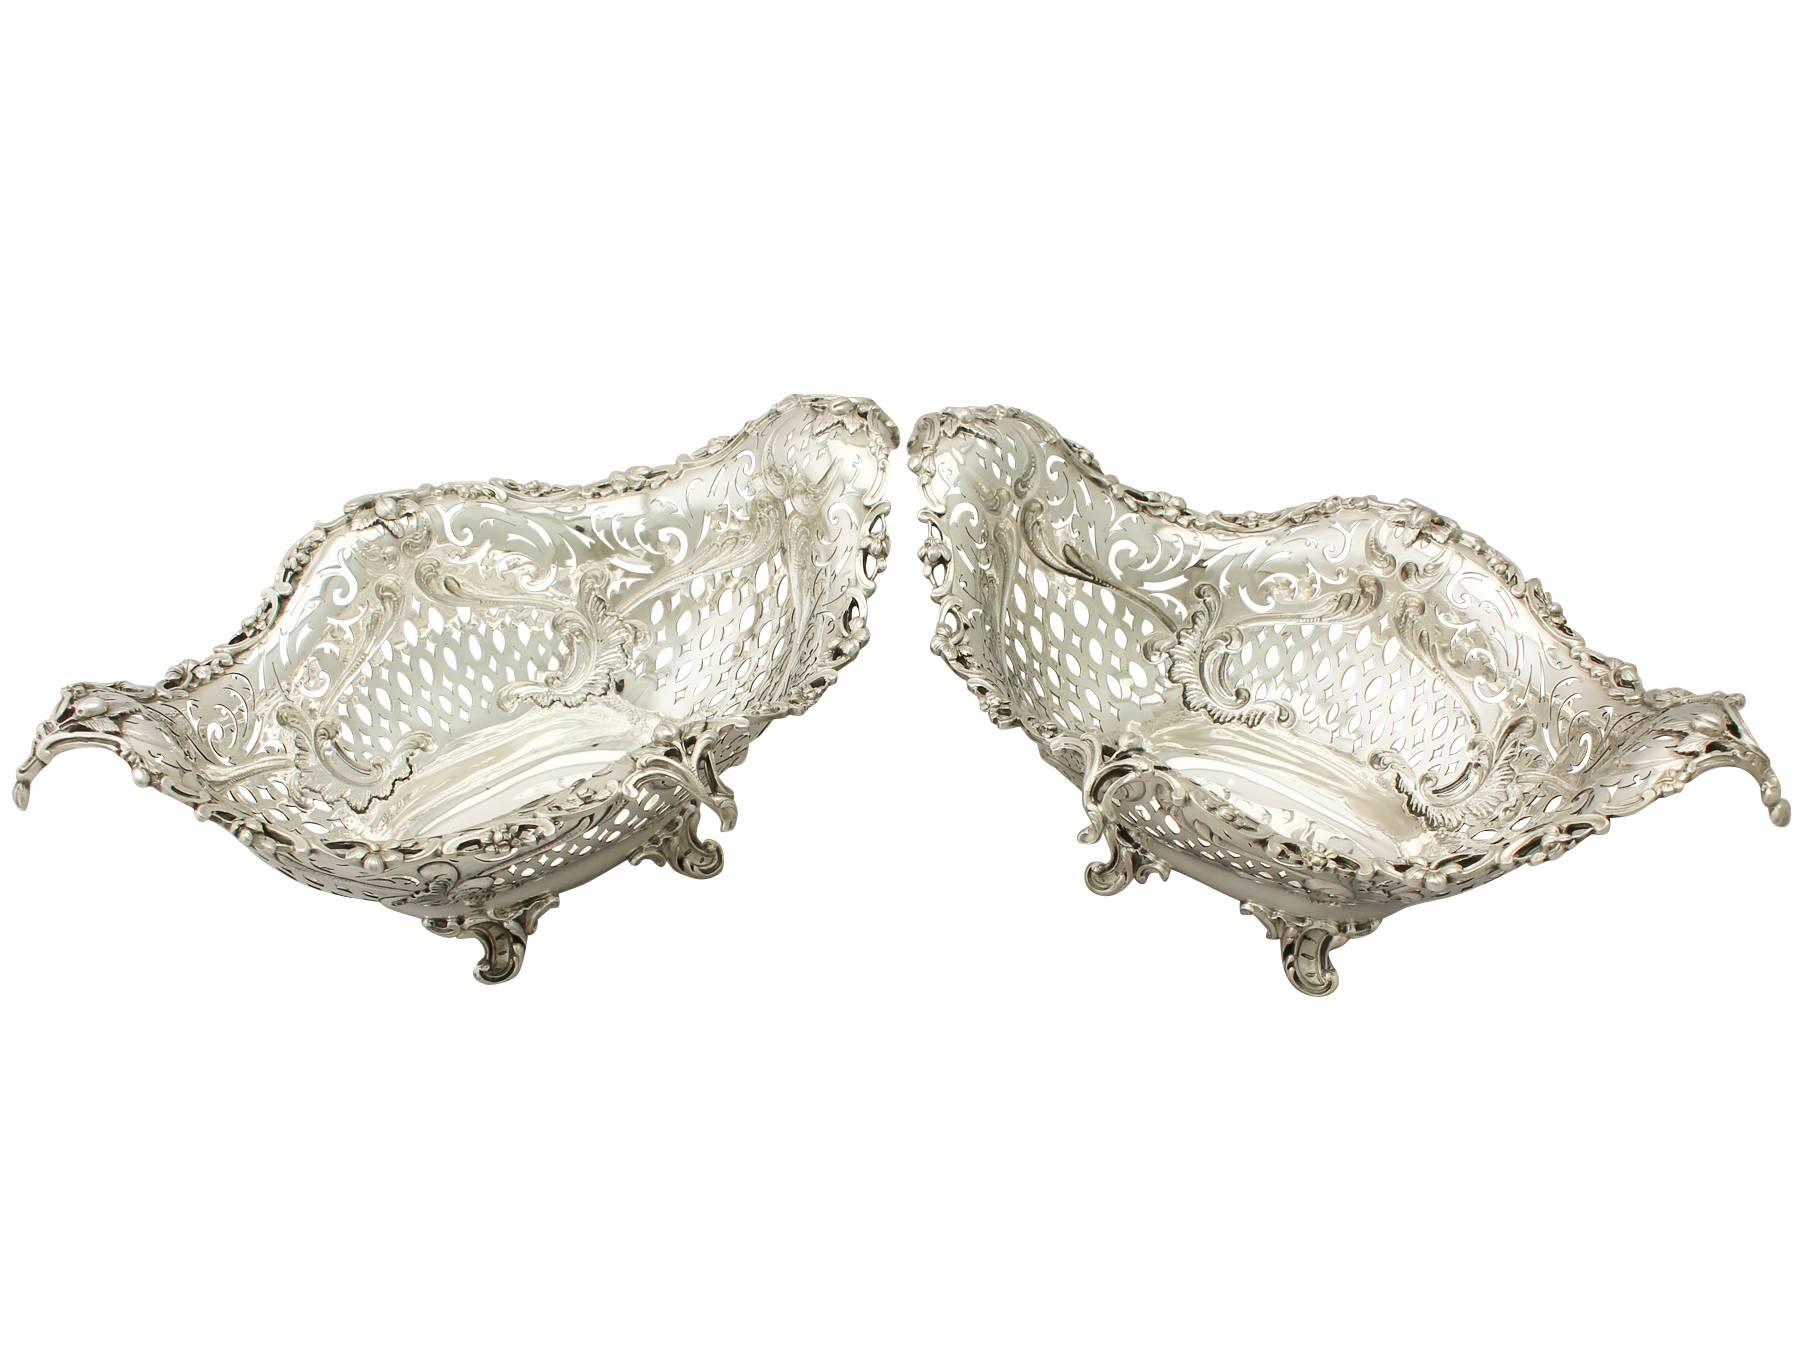 An exceptional, fine and impressive pair of antique Victorian English sterling silver presentation fruit dishes; part of our diverse silver baskets and dishes collection.

These exceptional antique Victorian sterling silver presentation dishes